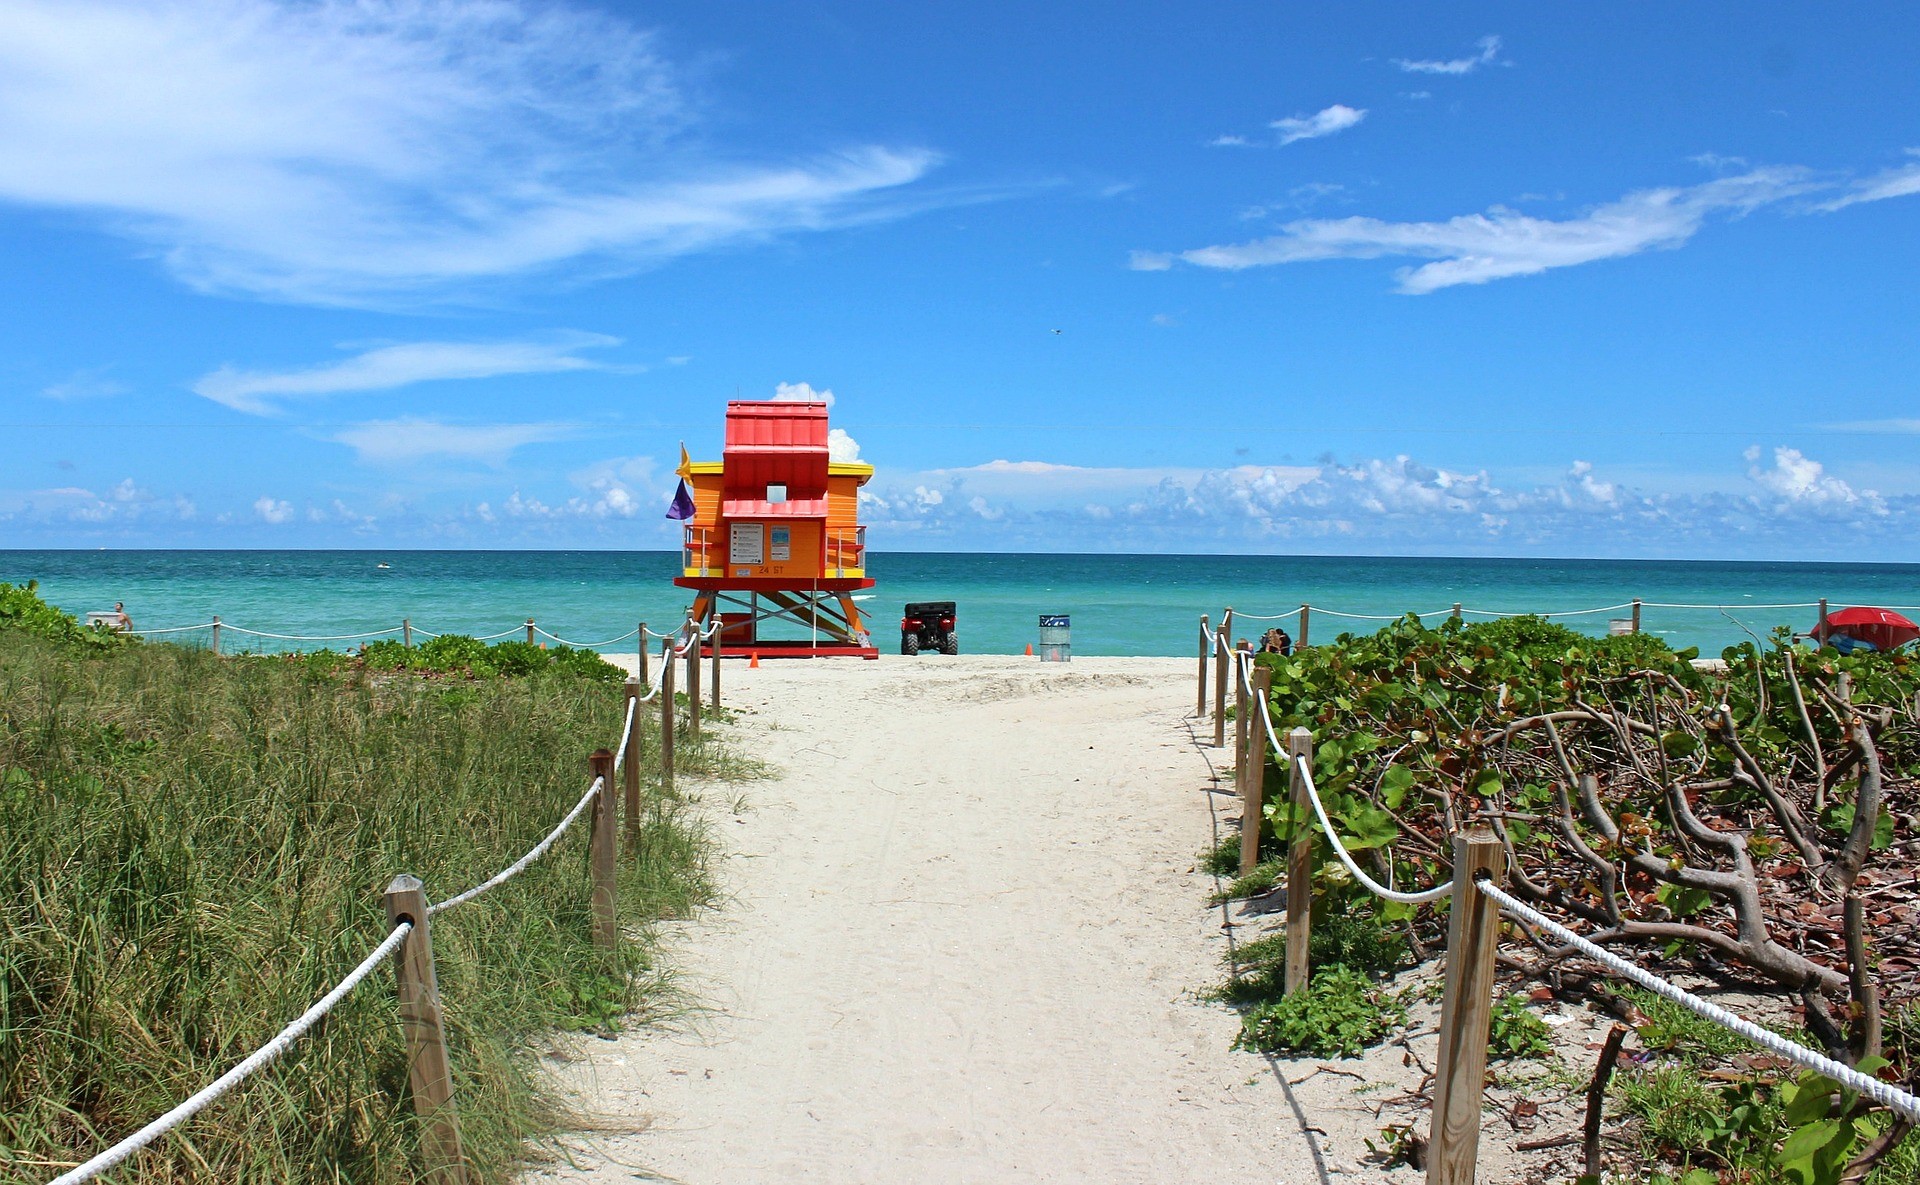 Fall into the Season with Special Events and Experiences on Miami Beach